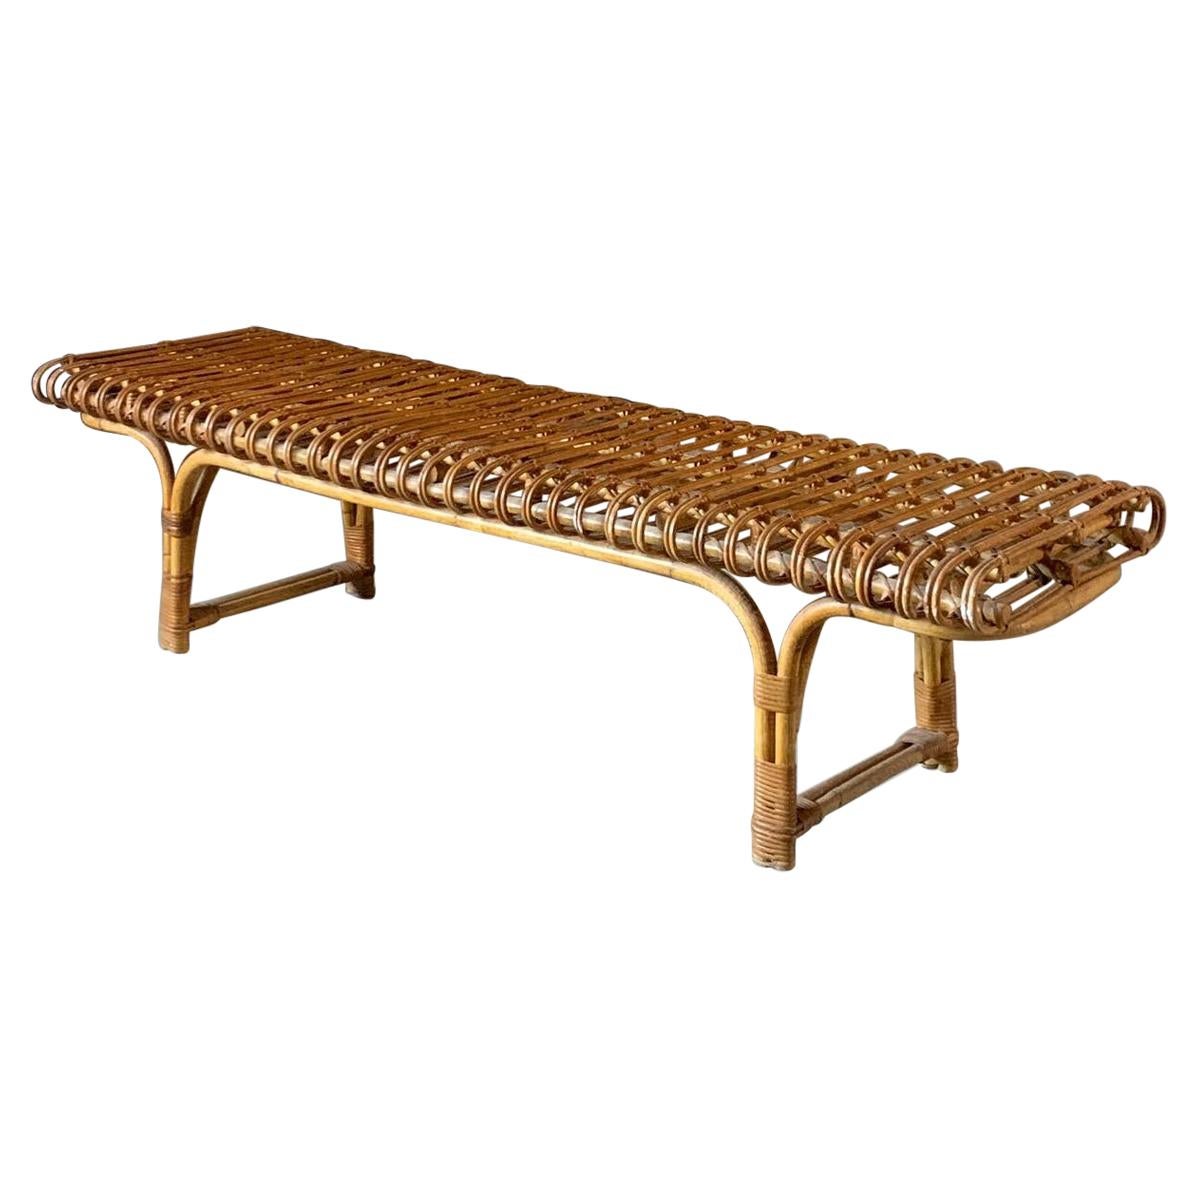 Rarest and Documented Rattan Bench by Joaquim Belsa, Spain, 1962